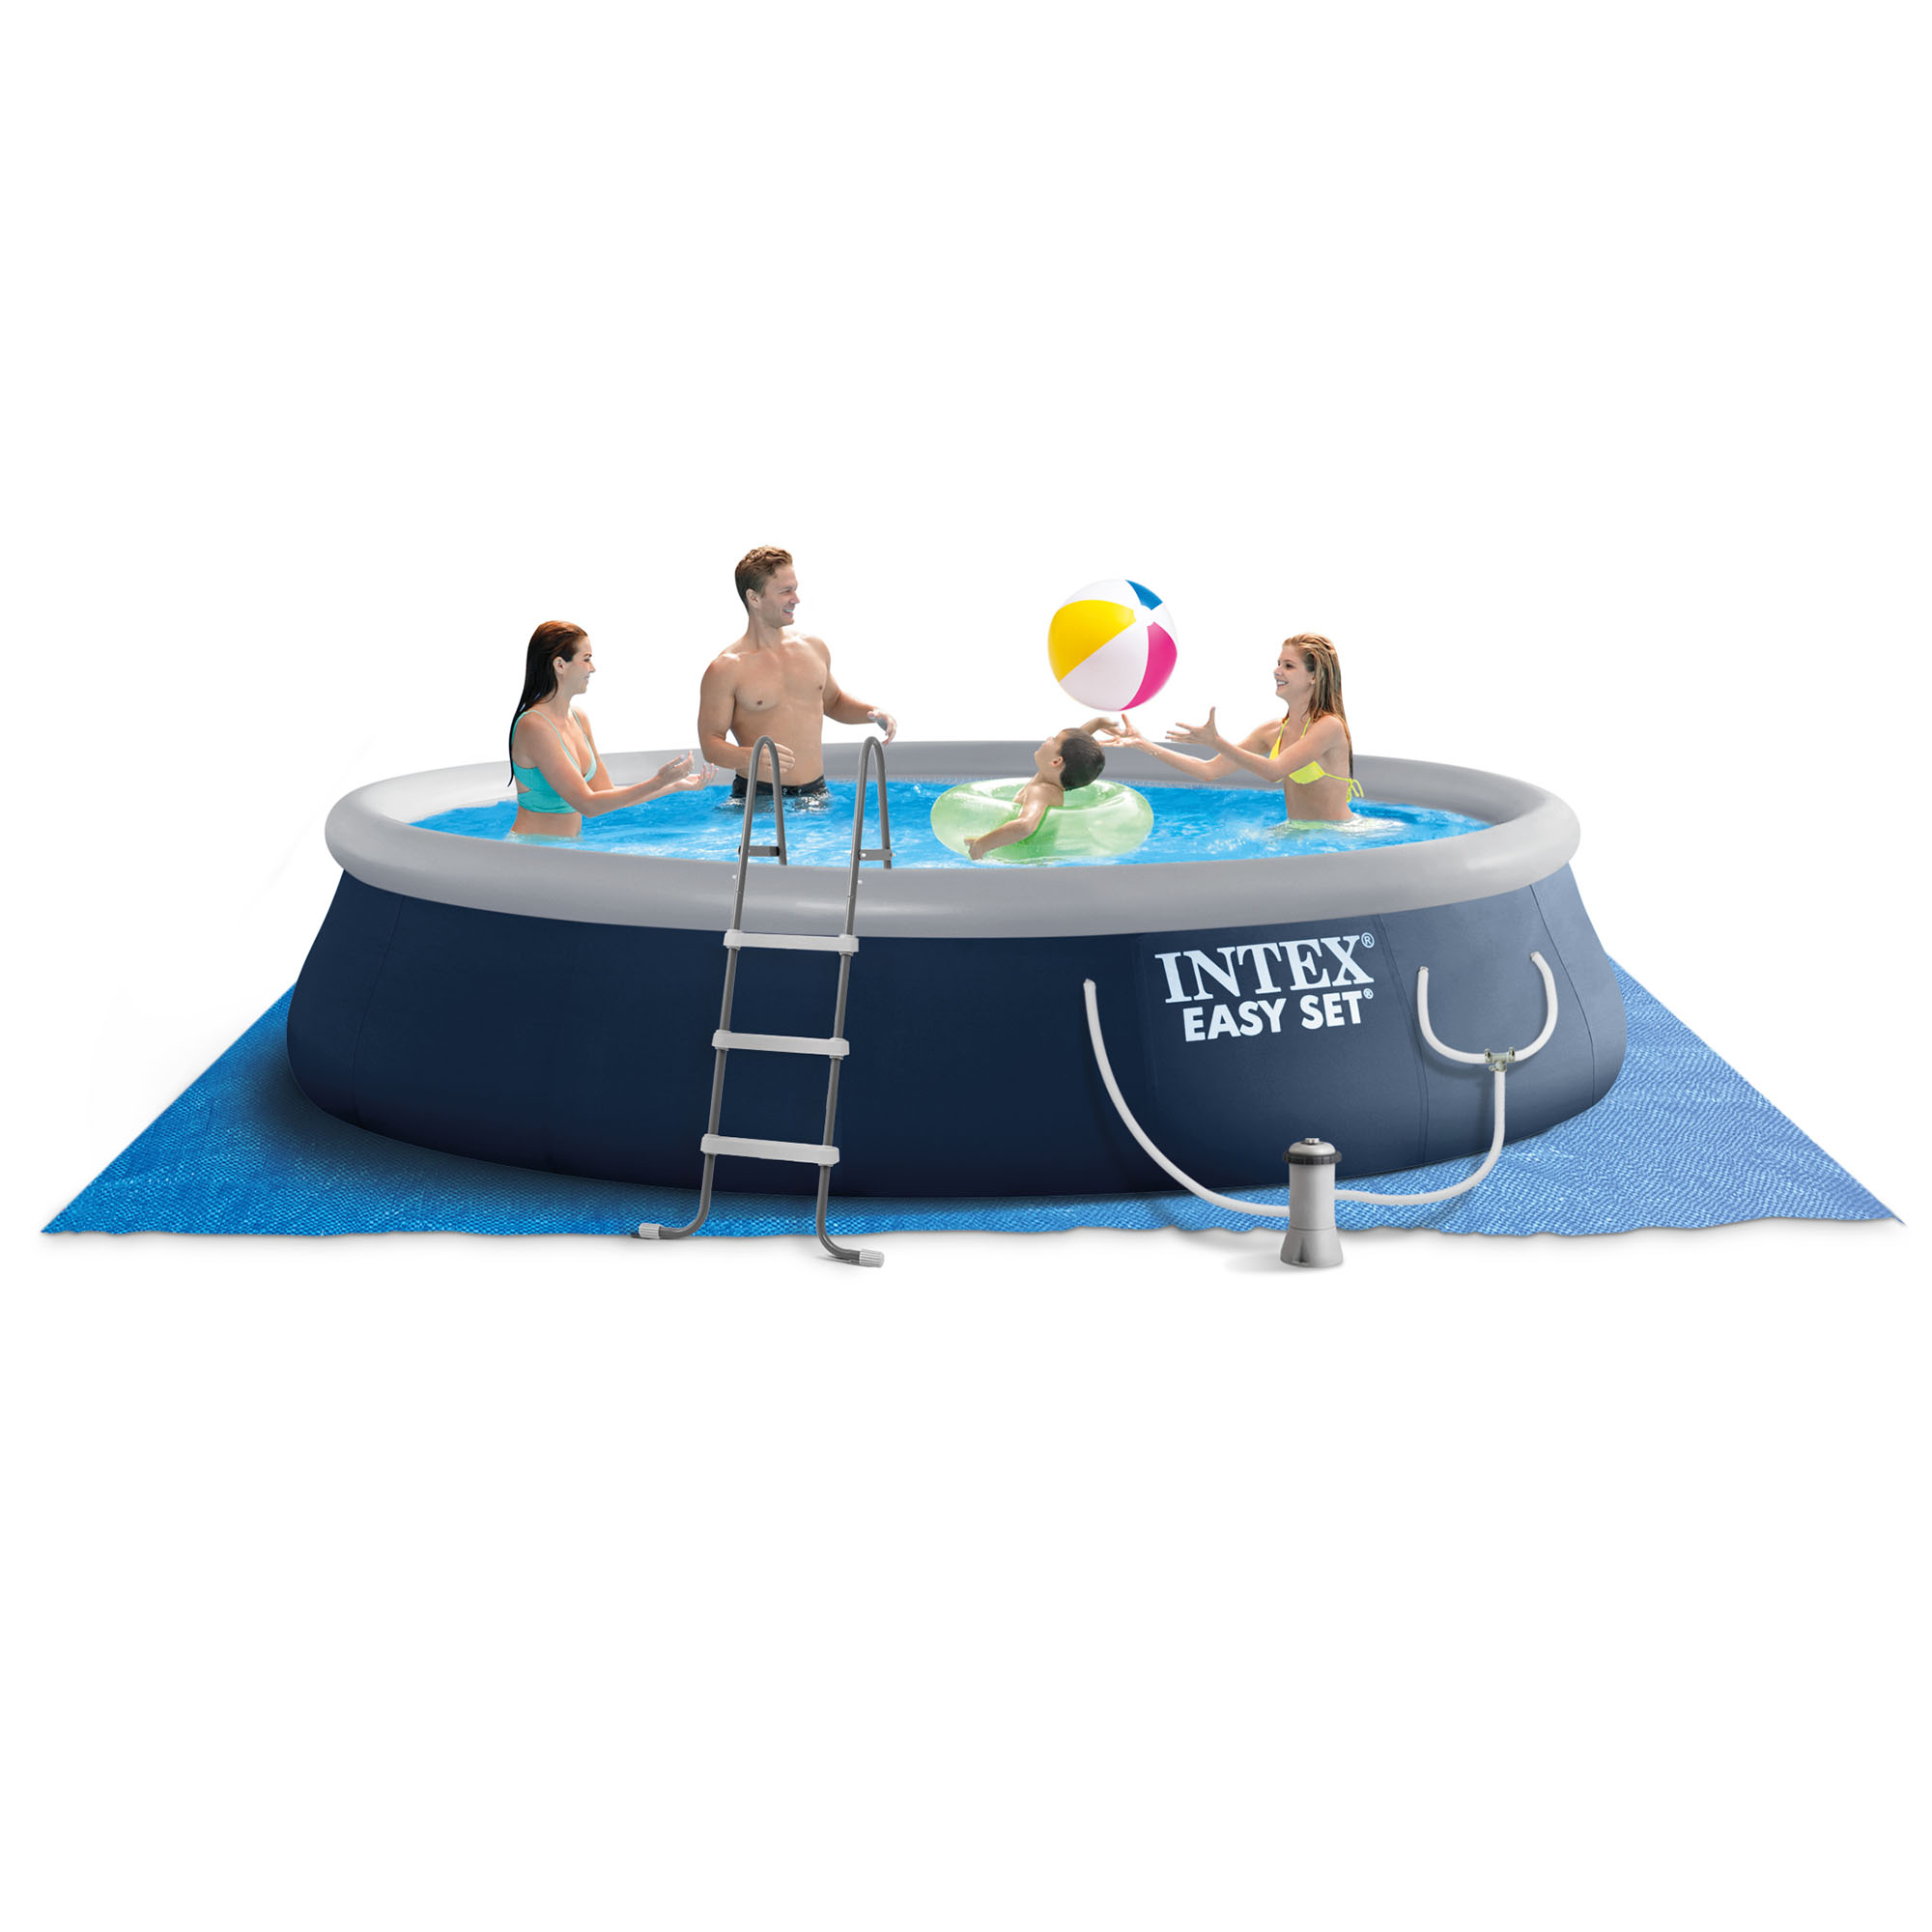 Intex 15ft x 42″ Easy Set Inflatable Above Ground Swimming Pool with Ladder, Pump